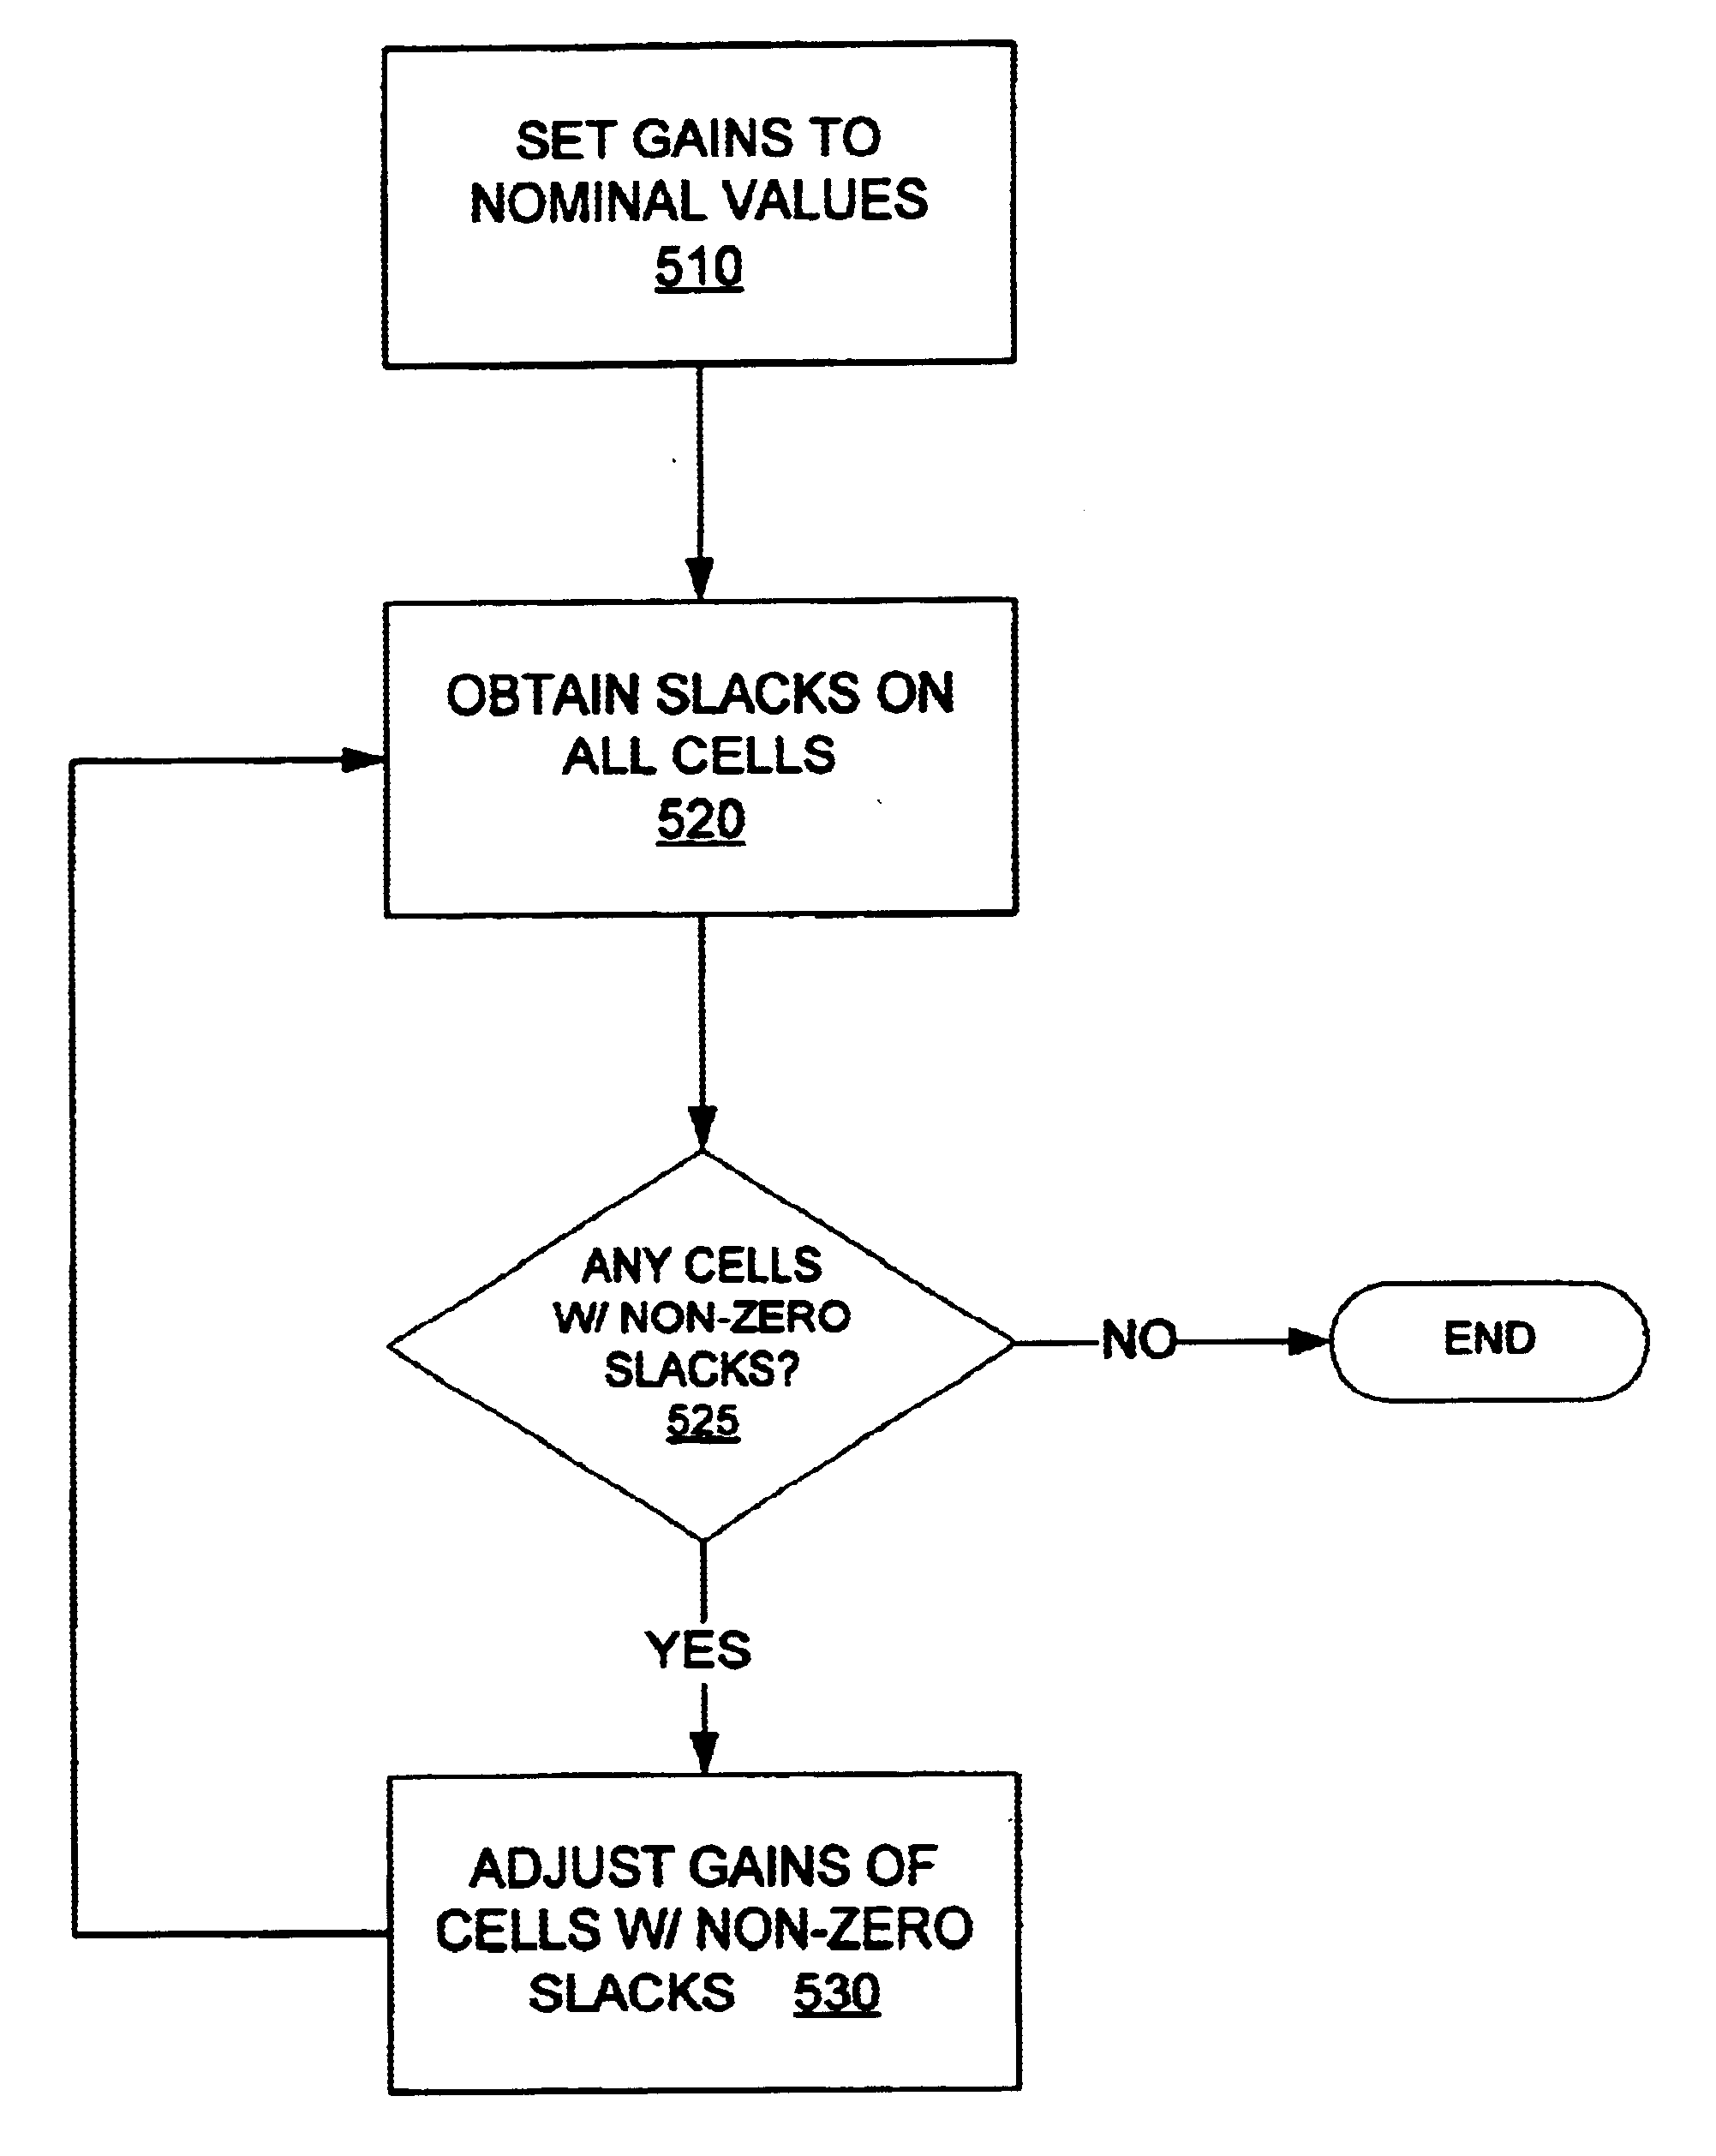 Method for generating design constraints for modules in a hierarchical integrated circuit design system